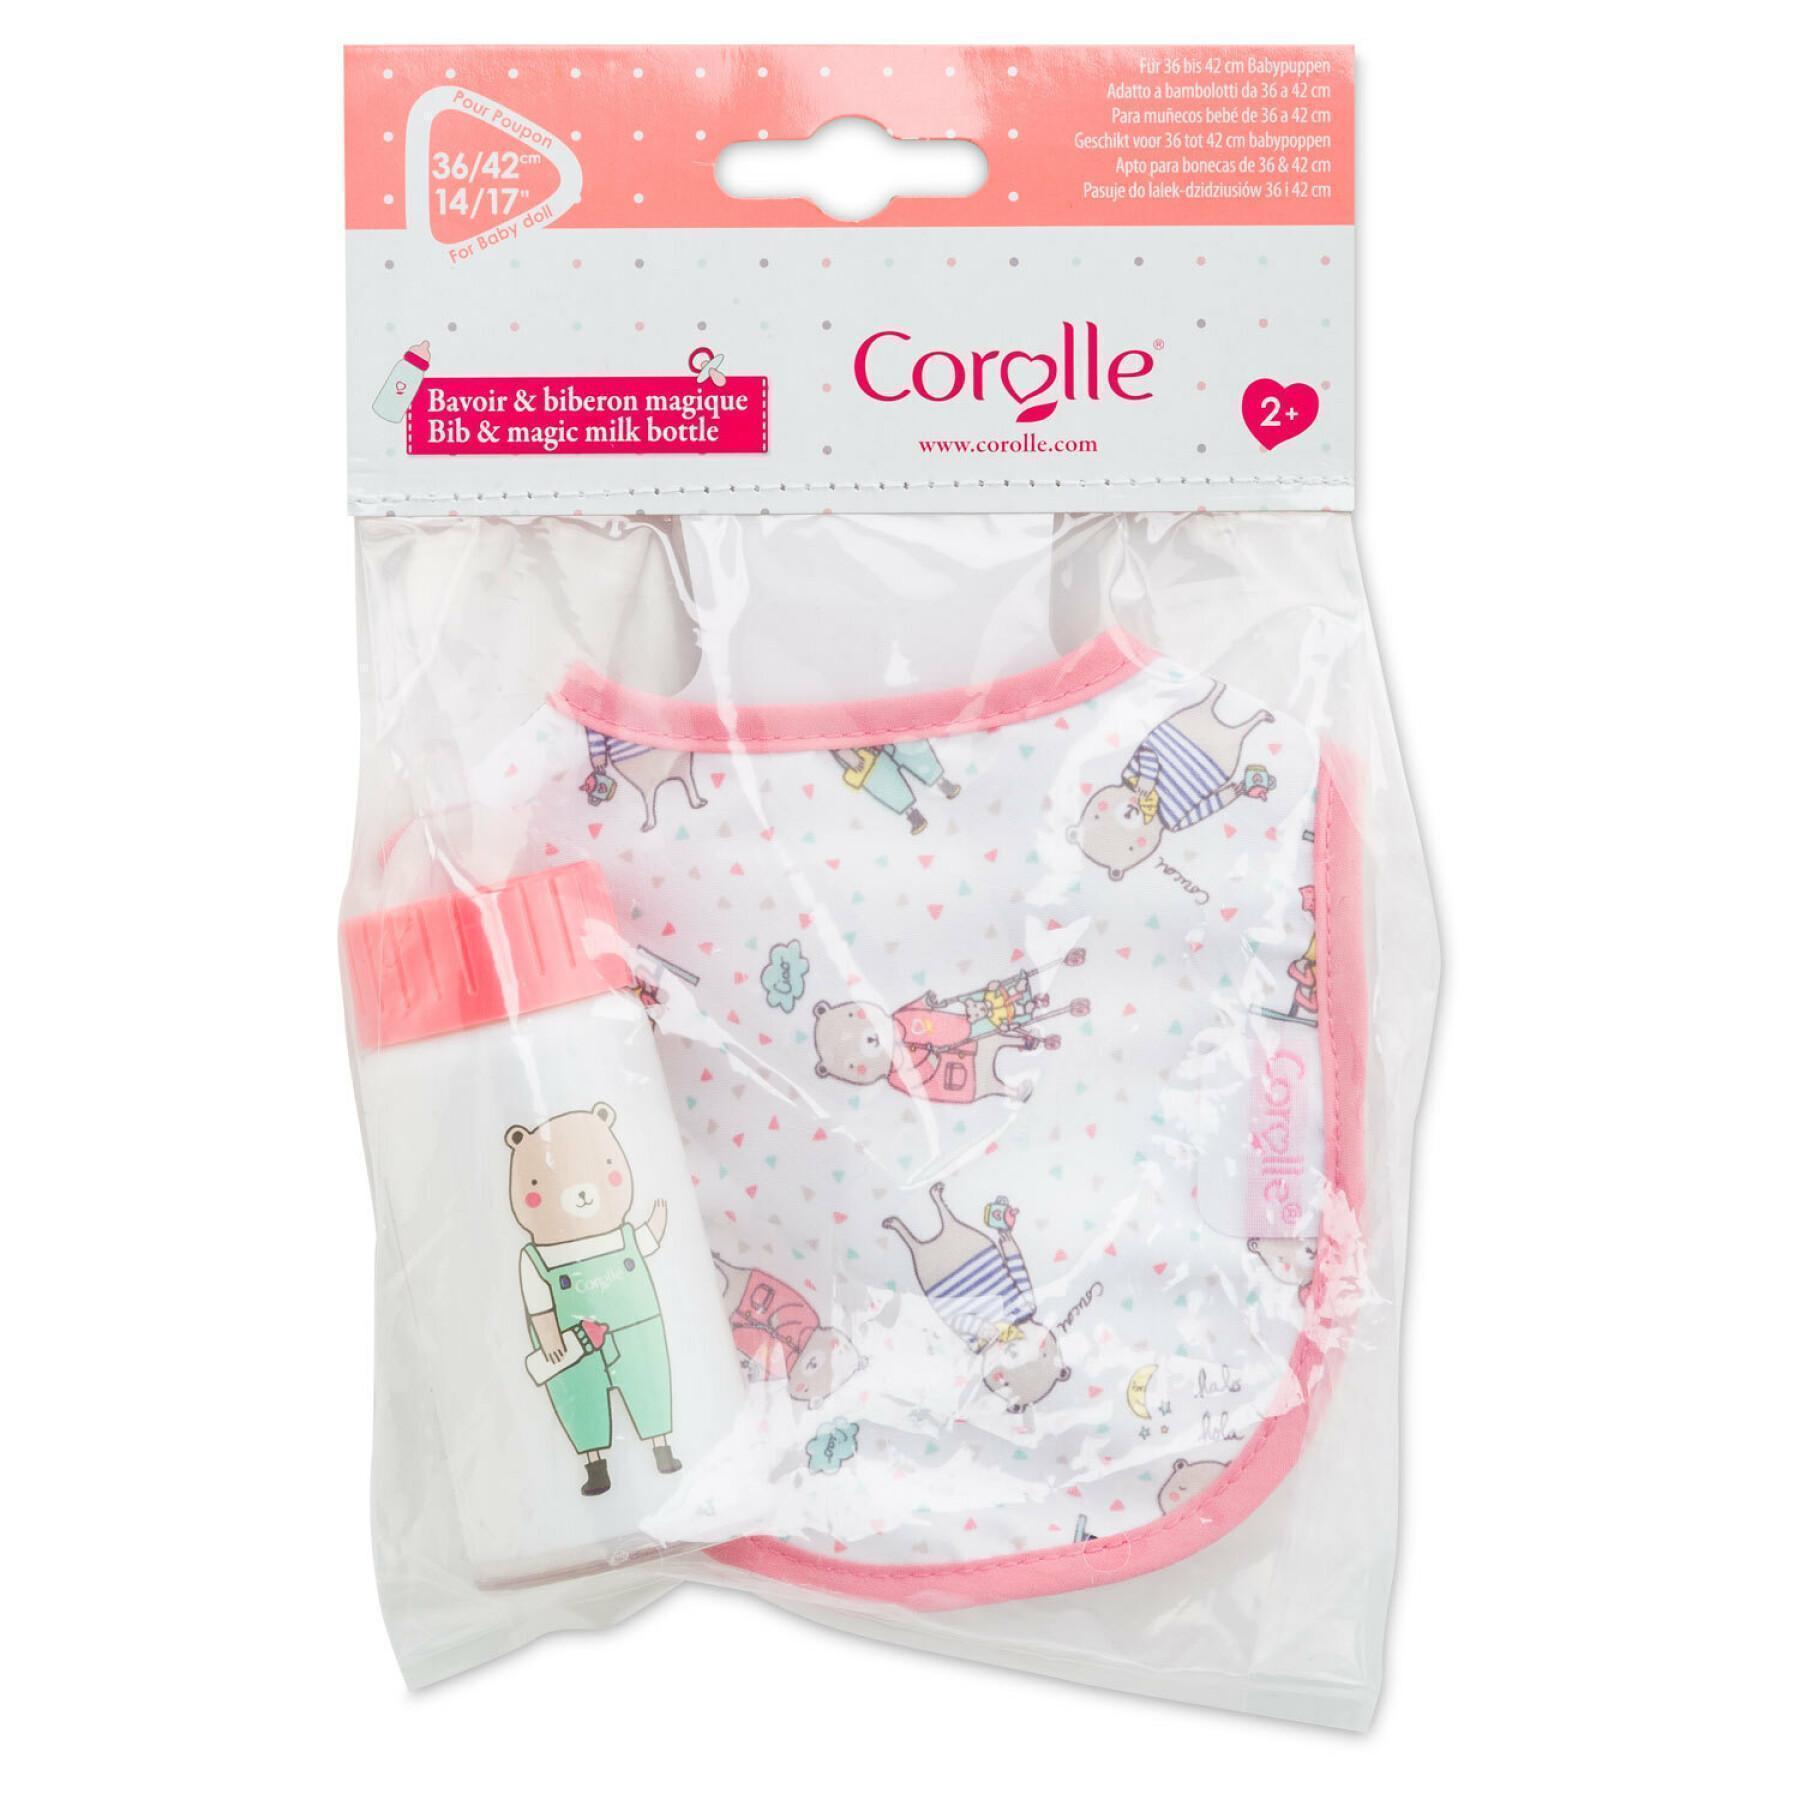 Bib and bottle for baby Corolle